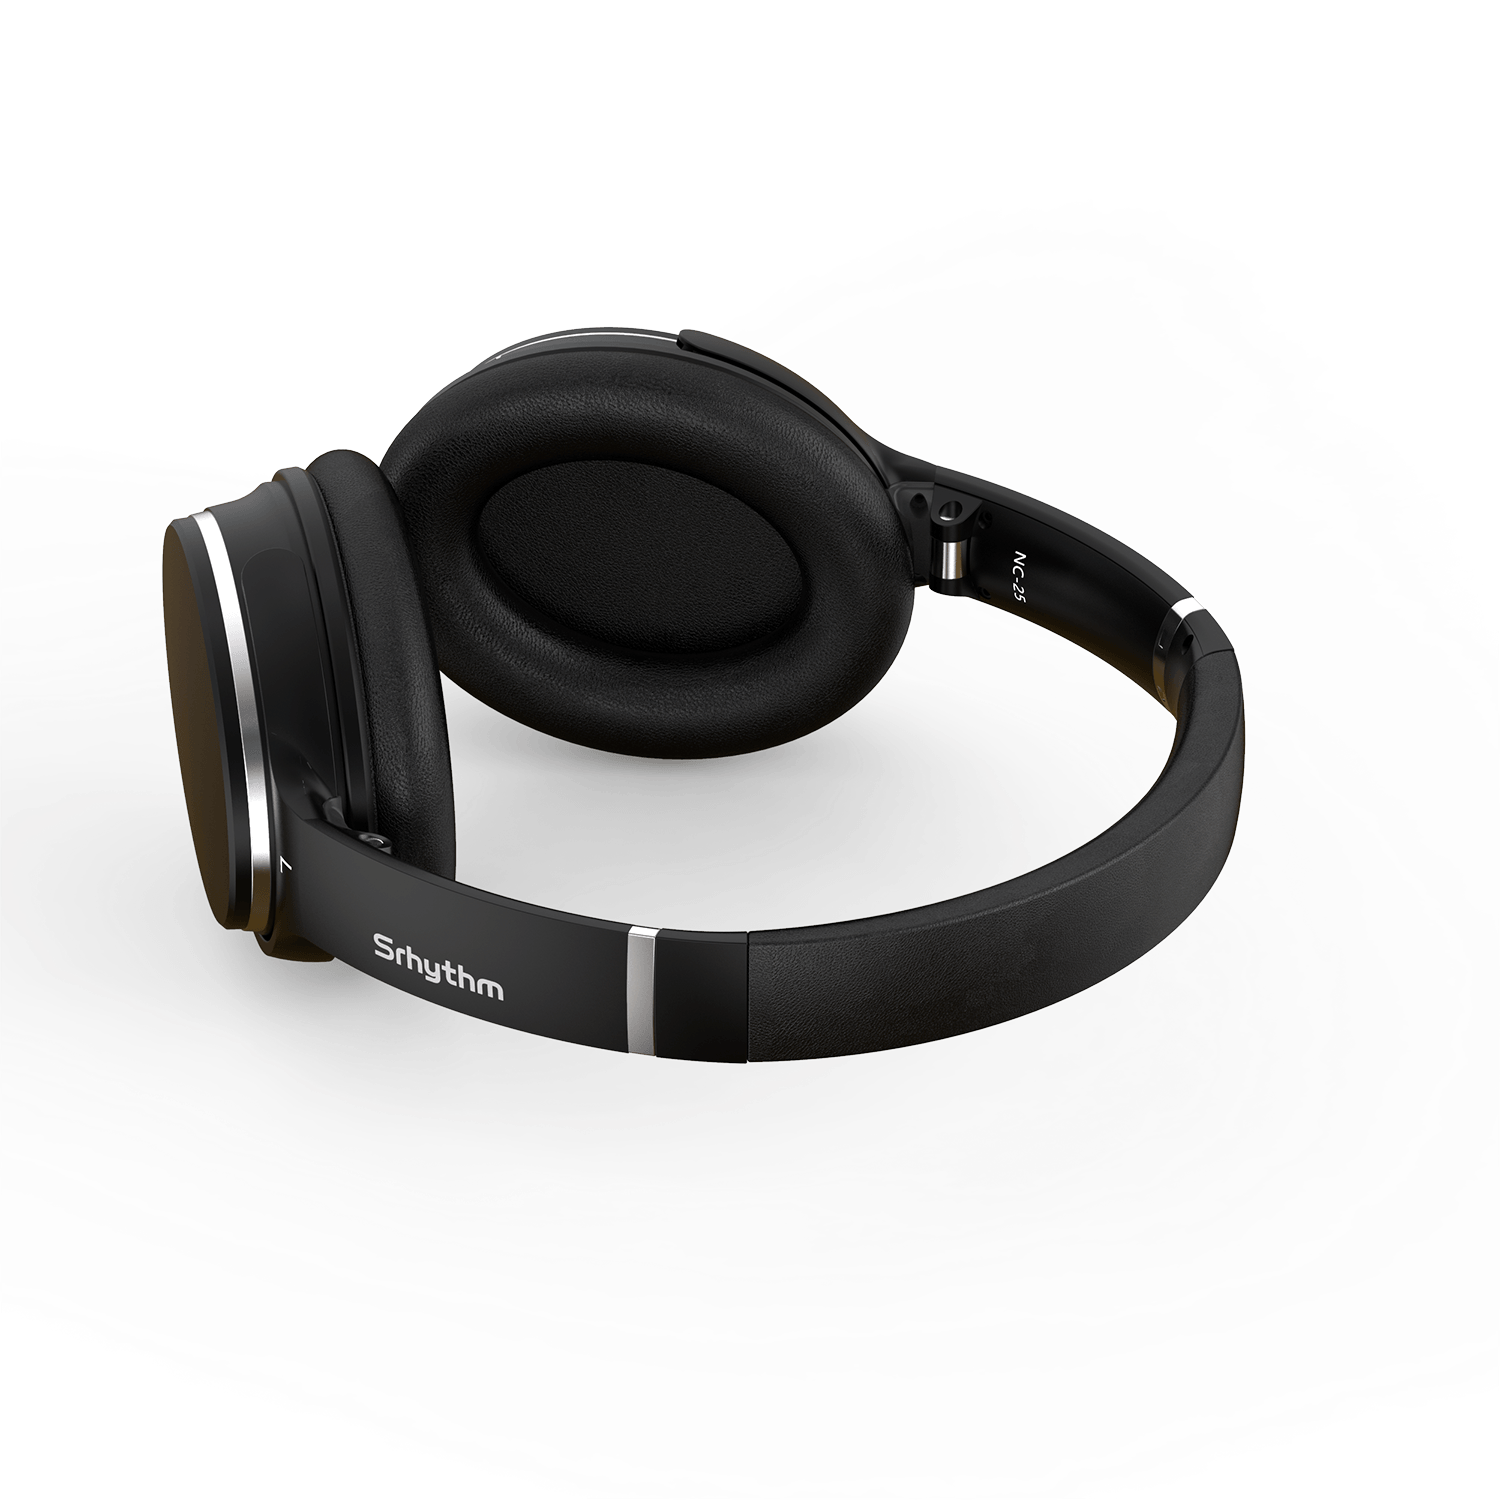 Srhythm NC25 Noise Cancelling Stereo Headphones Bluetooth 5.3, ANC Headset  over-Ear with Hi-Fi,Mic,50H Playtime,Low Latency Game Mode 